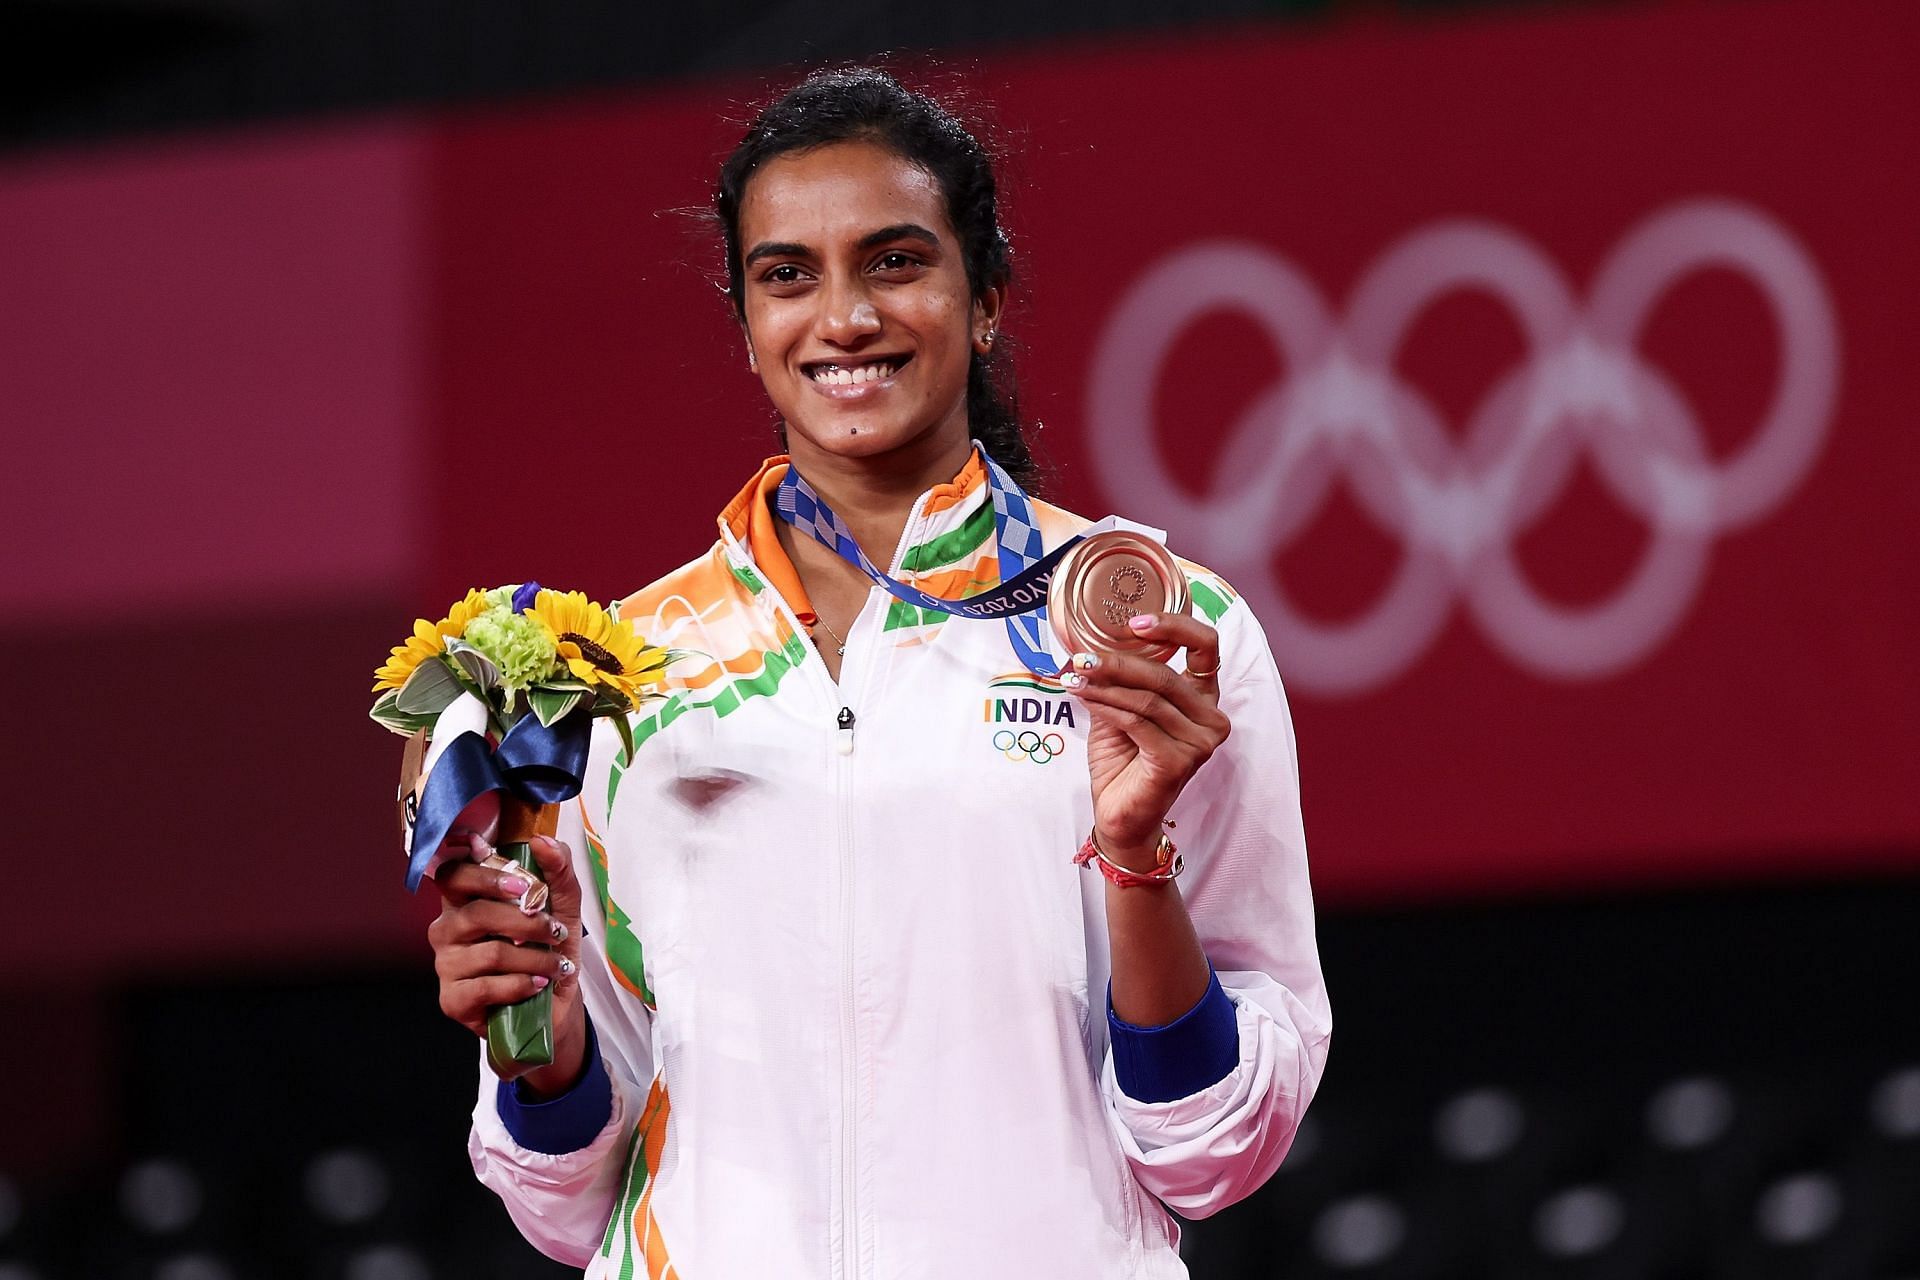 PV Sindhu will lead the Indian contingent at the French Open Badminton 2021